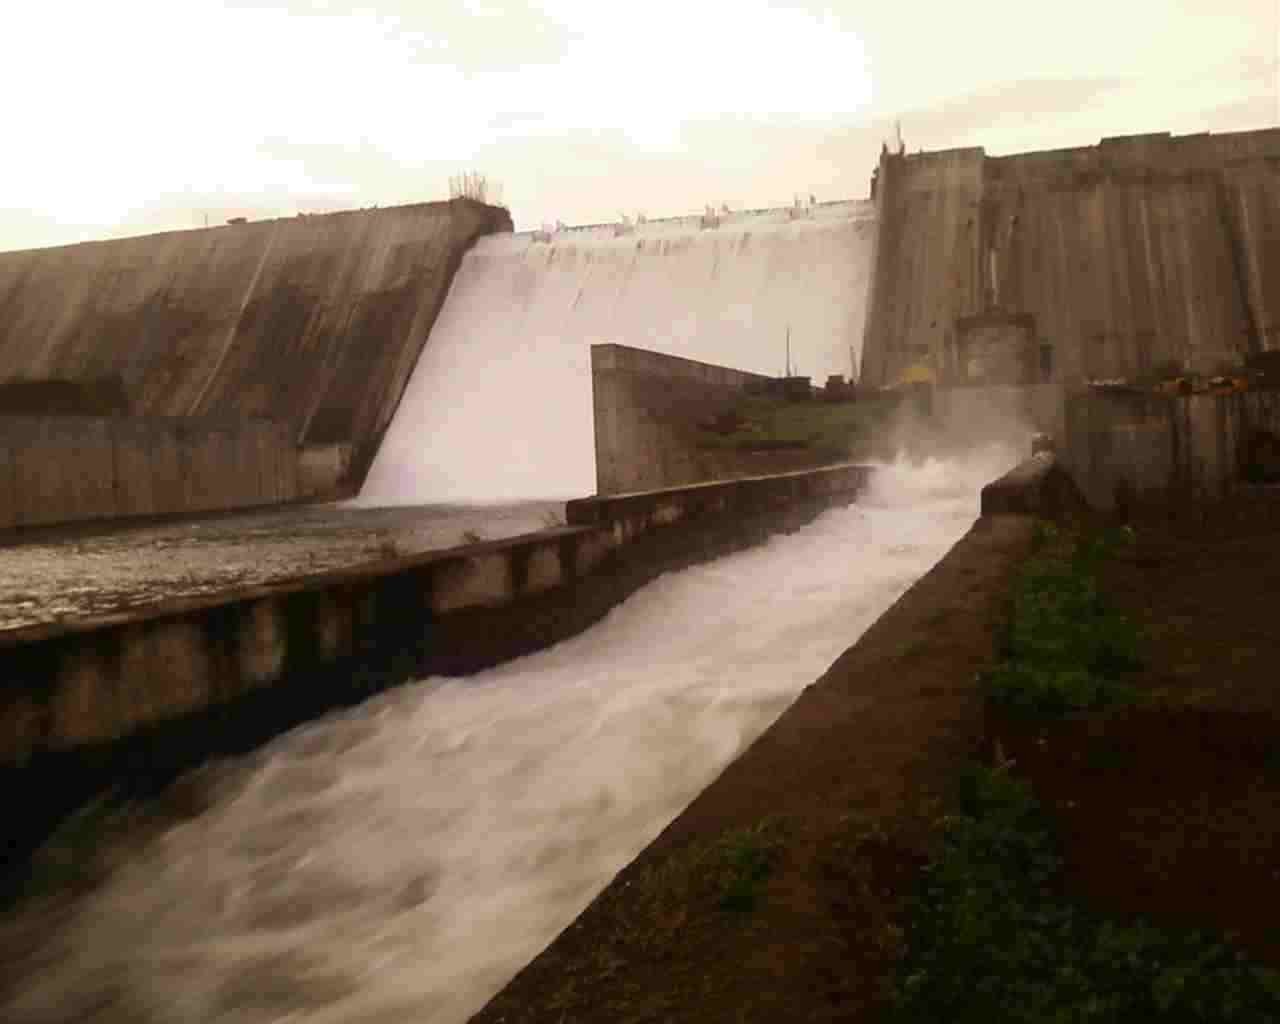 Nlwande Dam Drinking water cycle starts from today